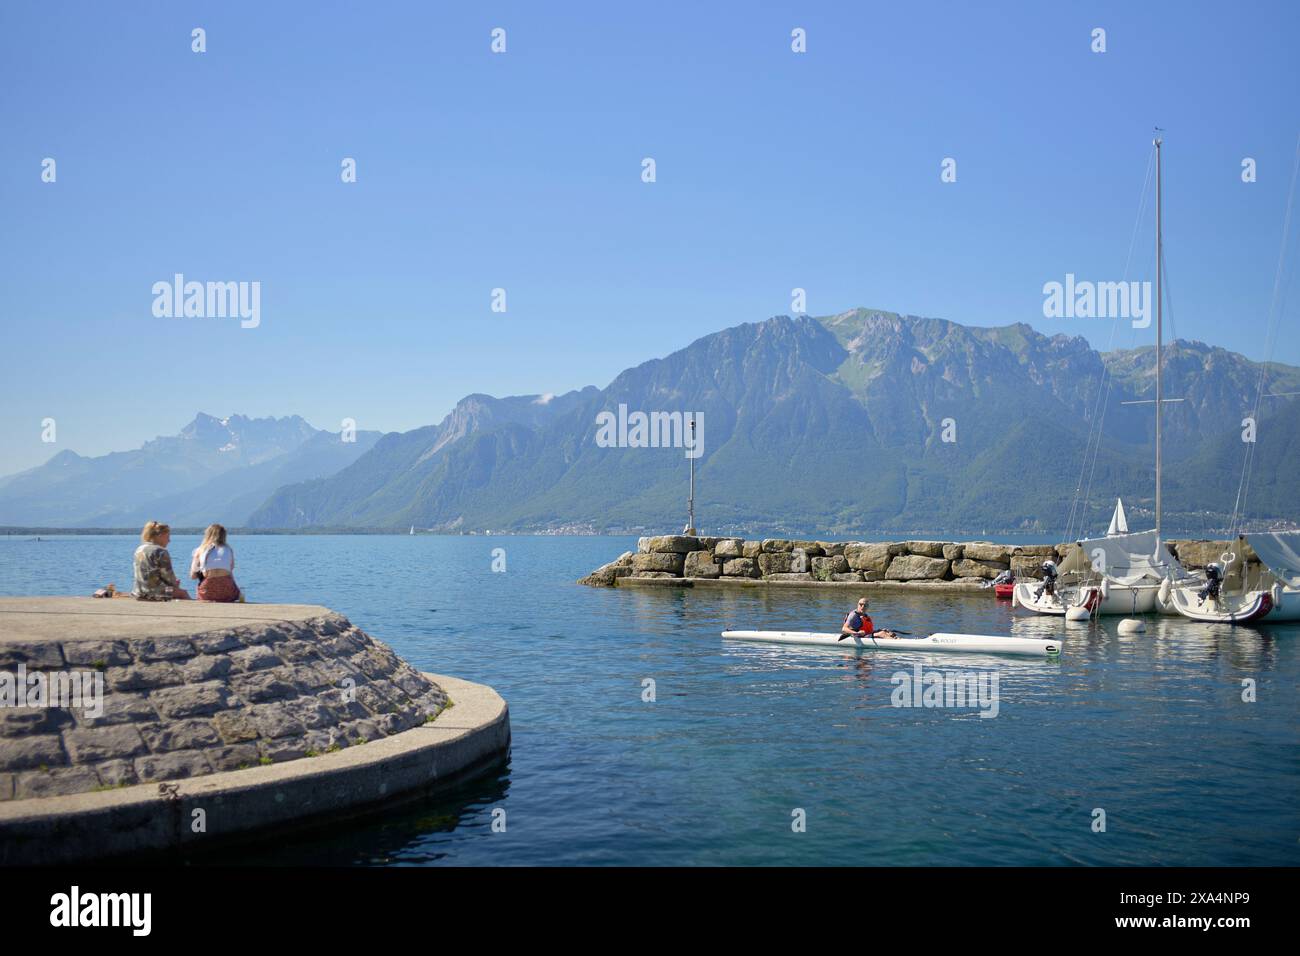 A scenic lakeside view where two people are seated on the edge of a pier, looking out at the water where a person is kayaking near docked sailboats, with mountains in the background under a clear blue sky. Stock Photo